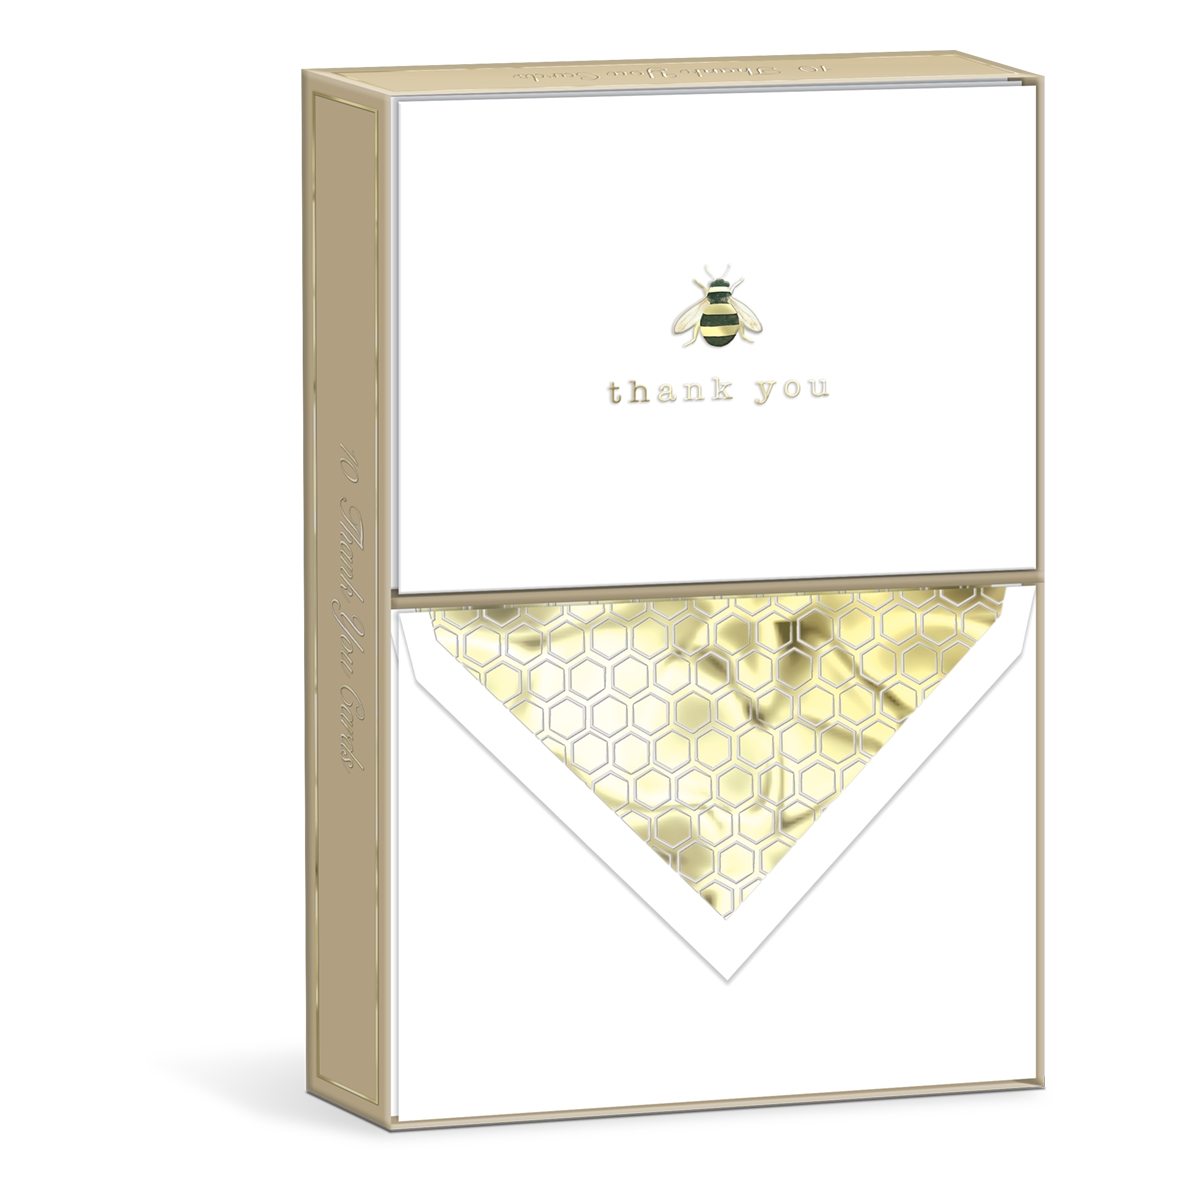 Thank you card box with bee on the cards.